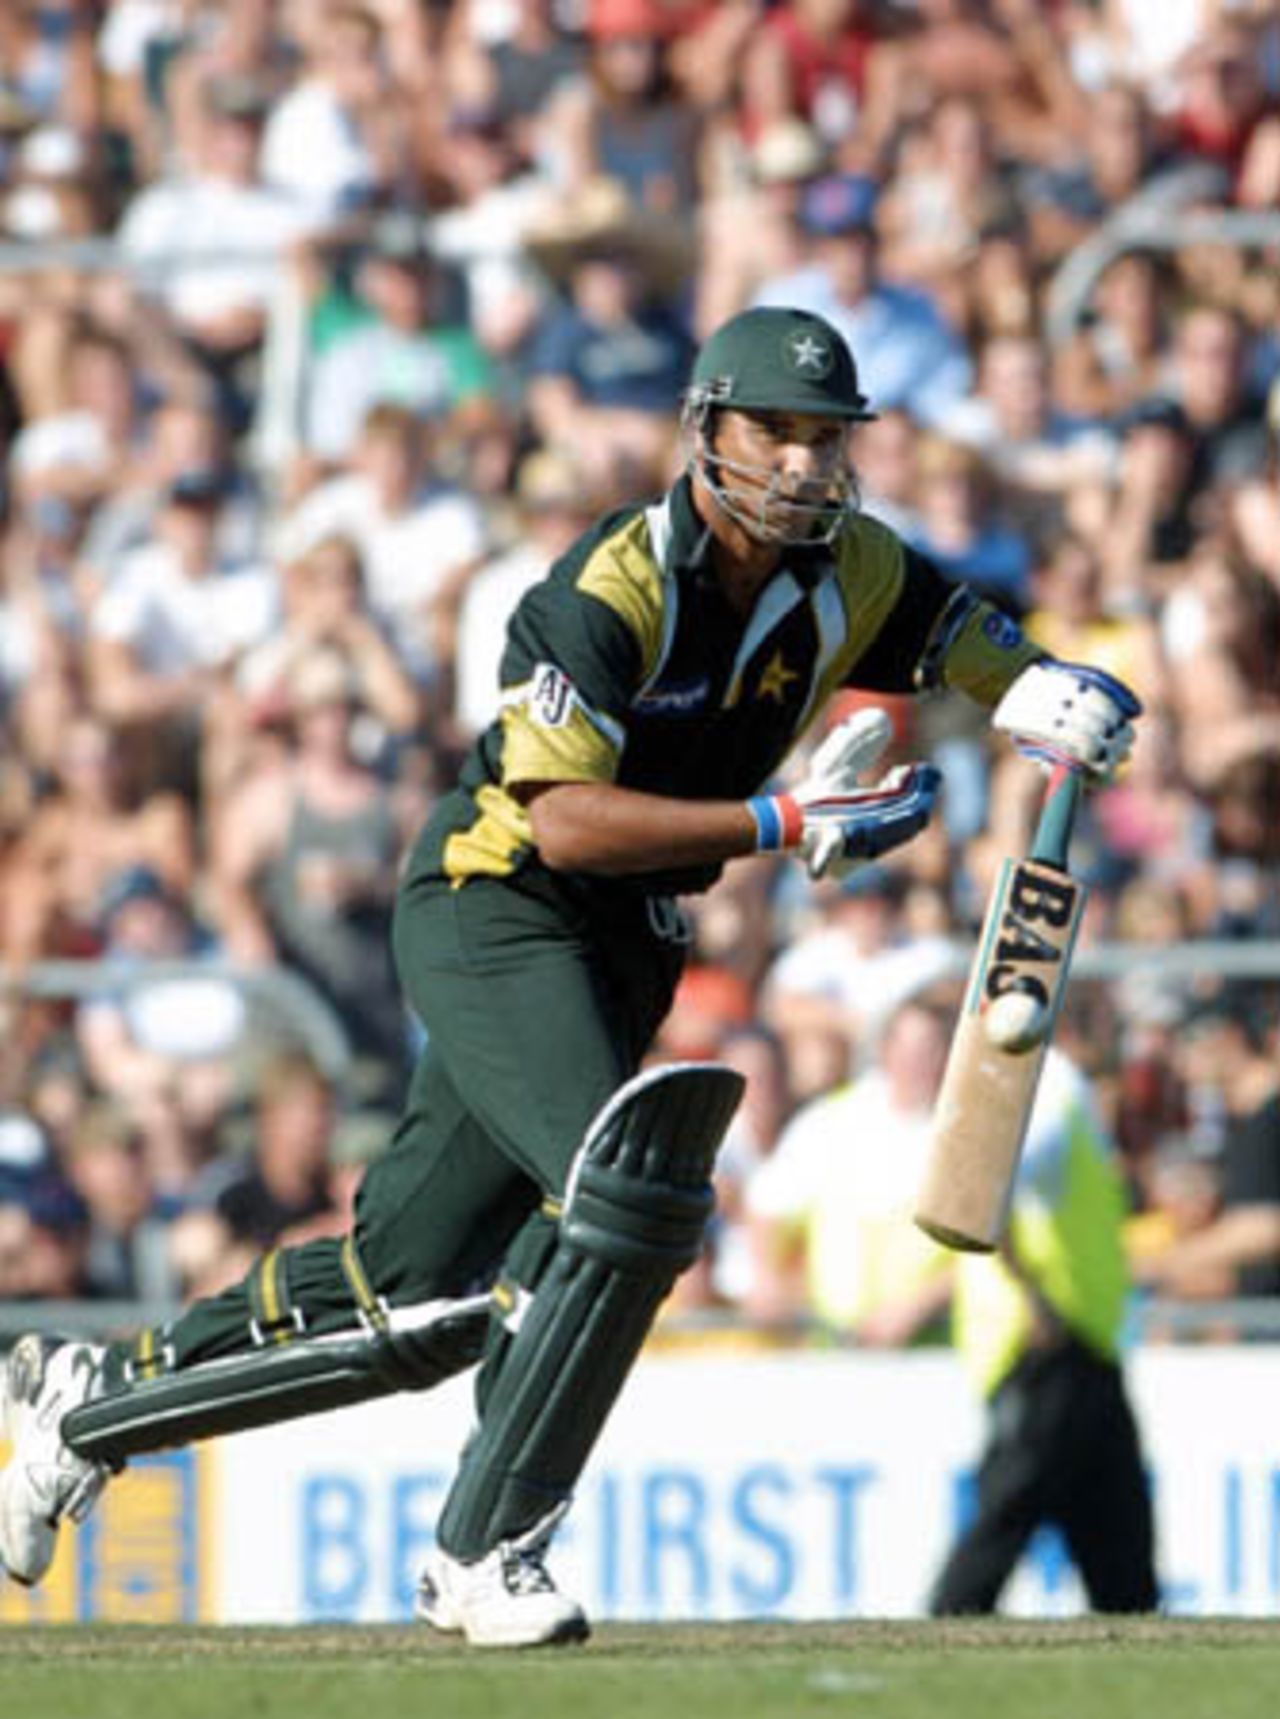 Pakistan lower order batsman Waqar Younis pushes a ball into the off side during his innings of two. 5th One-Day International: New Zealand v Pakistan, Carisbrook, Dunedin, 28 February 2001.